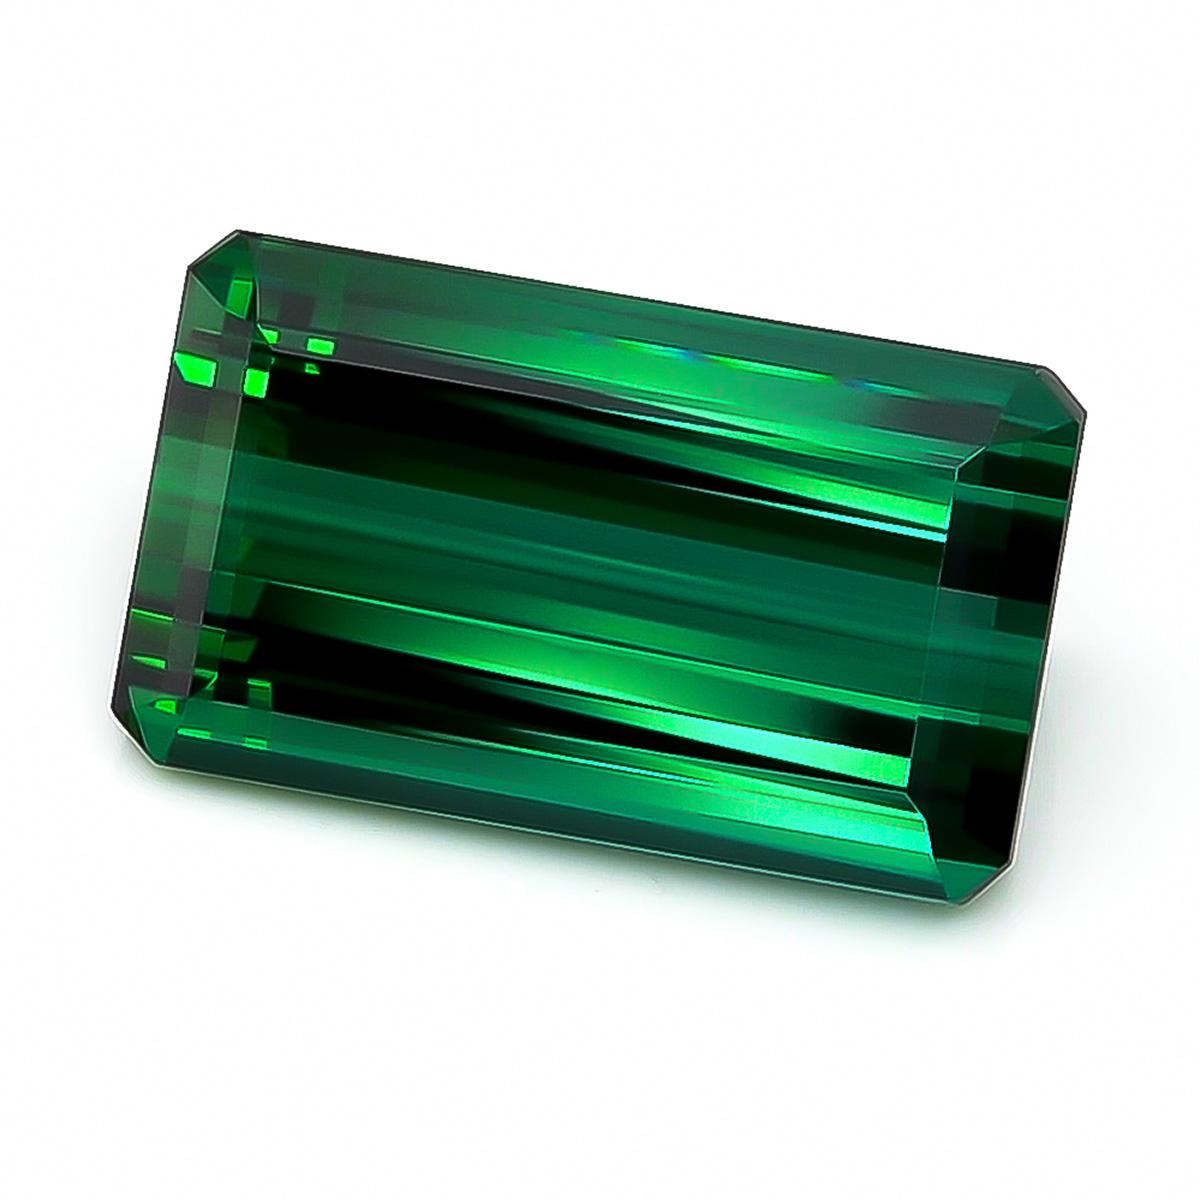 Step into the world of stunning gemstones with our 15.42 carats Natural Green Tourmaline. Its emerald shape, measuring 19.69 x 11.68 x 7.07 mm, showcases captivating colors and dazzling facets. Hailing from beautiful Brazil, this gem adds elegance